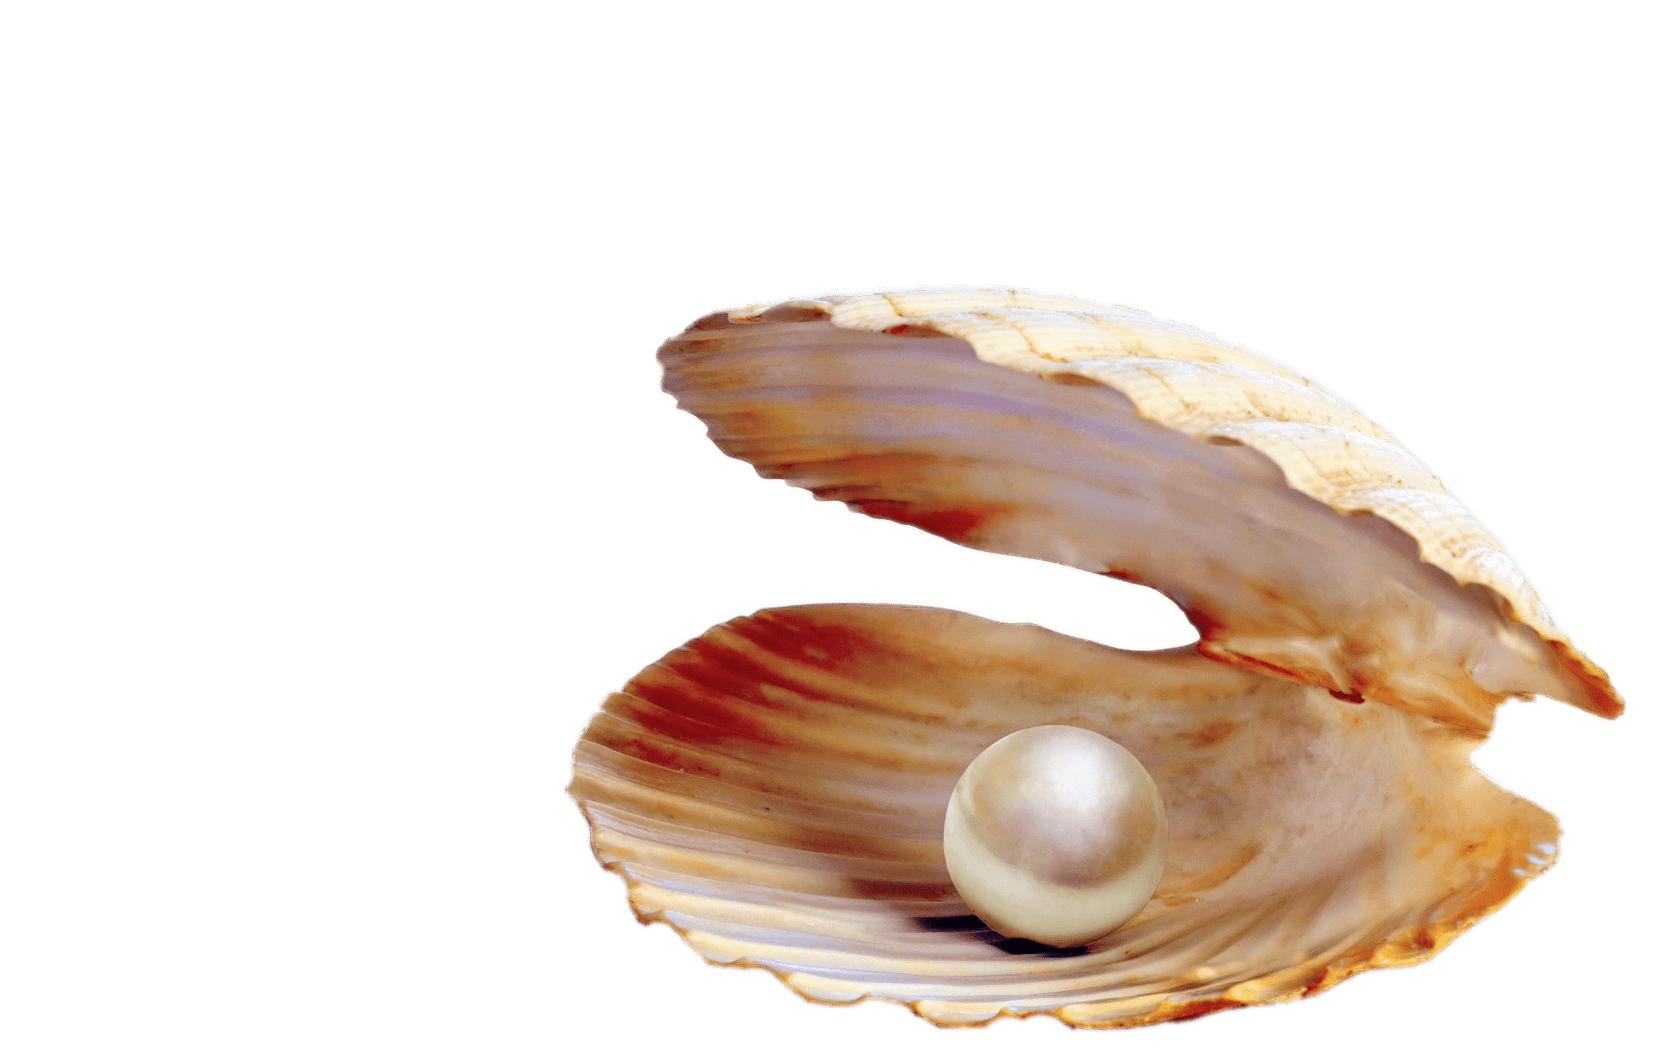 Seashell Clipart, Free Sea Shell PNG images Download - Free Transparent